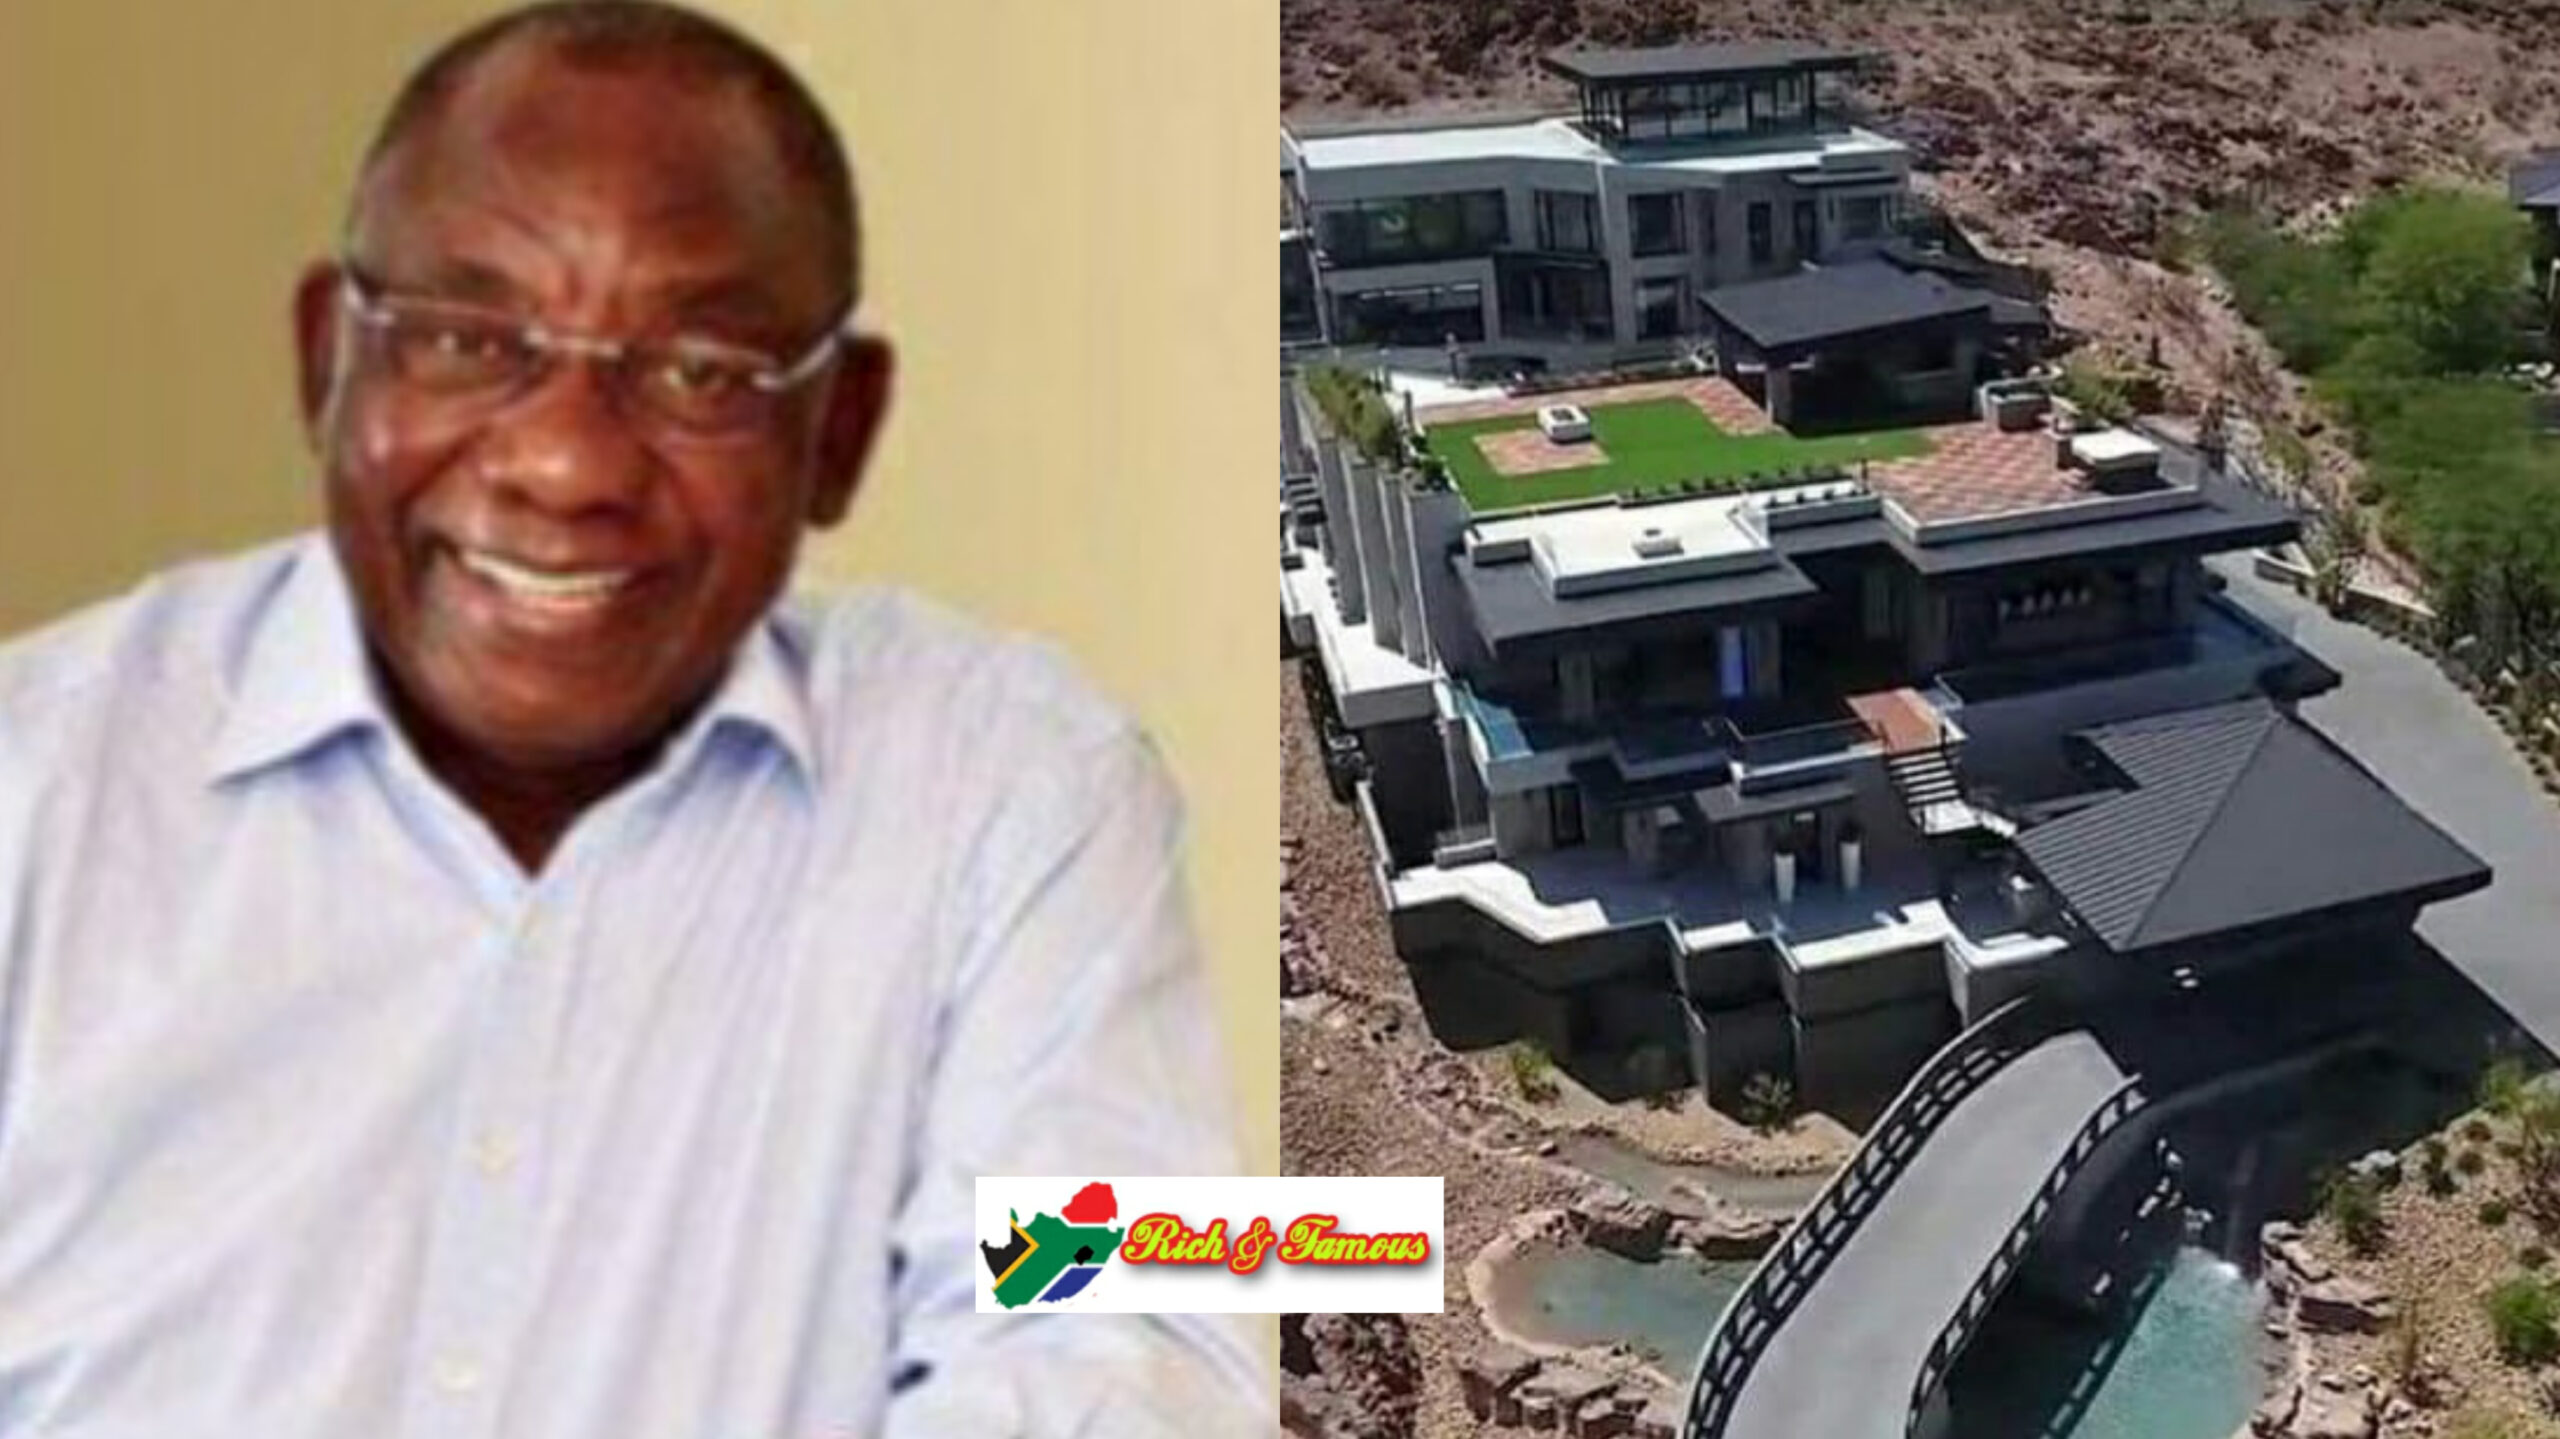 Cyril Ramaphosa S Two Massive Mansions Shock South Africans South Africa Rich And Famous